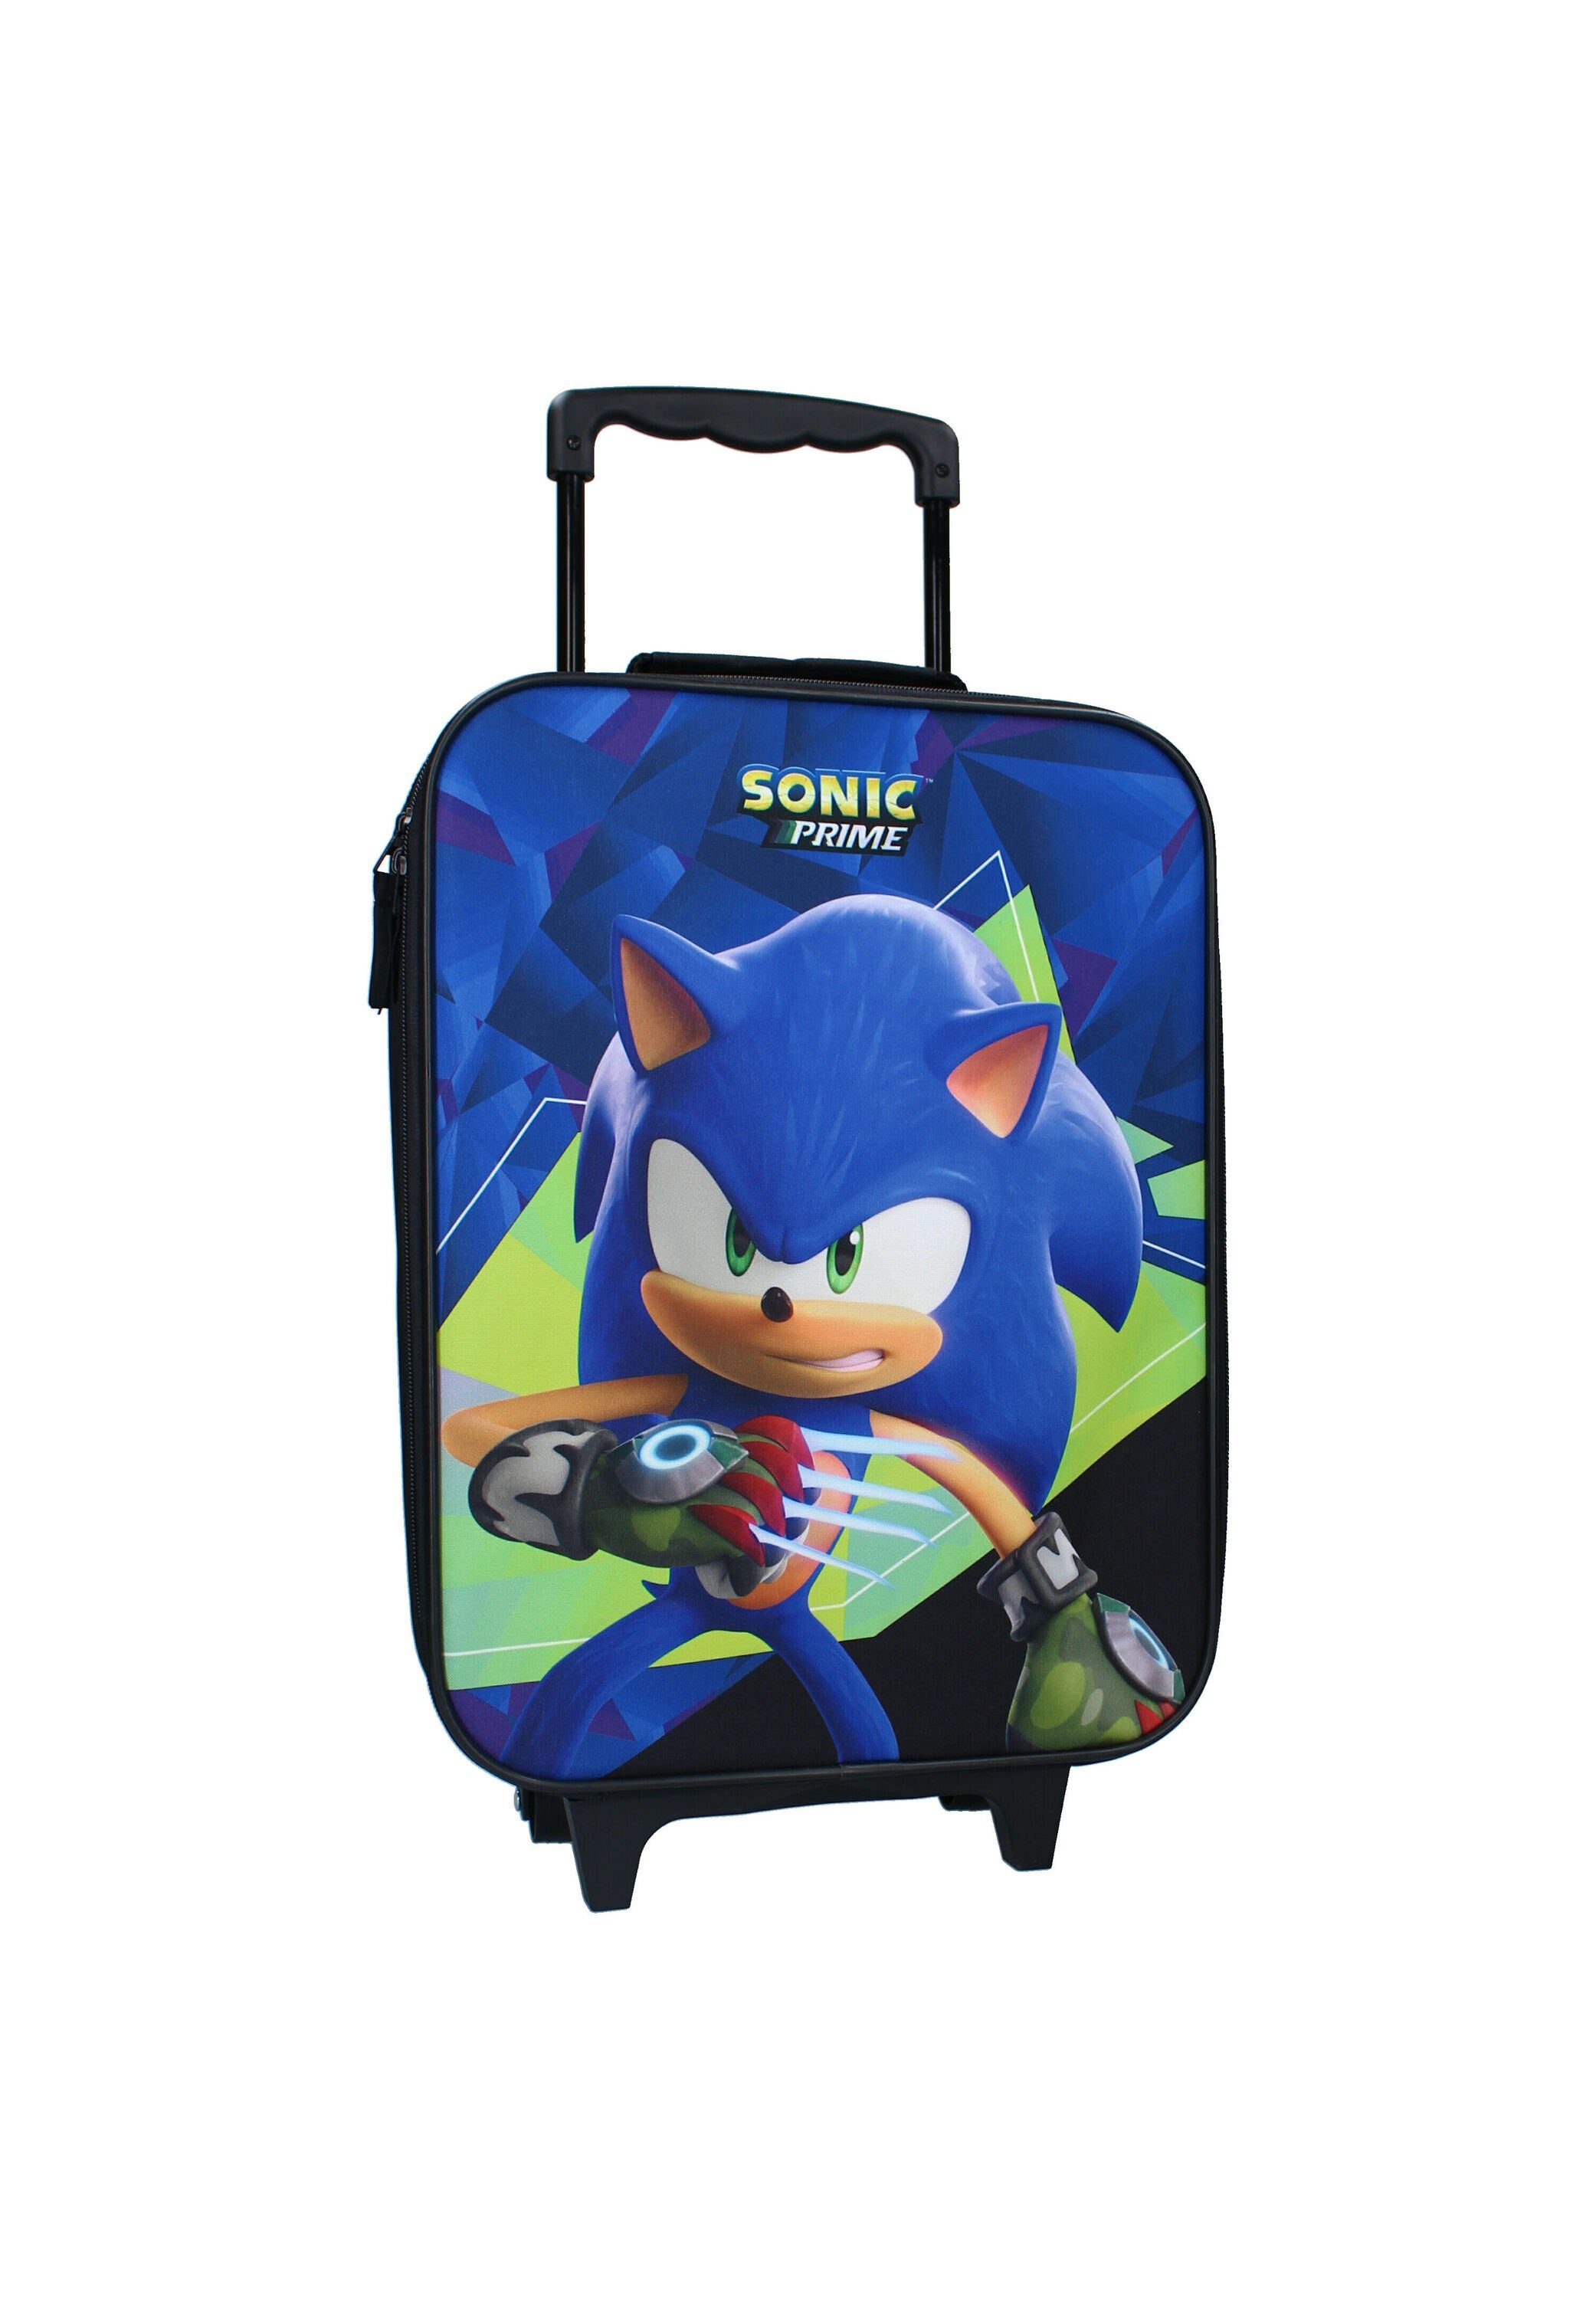 Handgepäck-Trolley Was I Made Vadobag For This Sonic